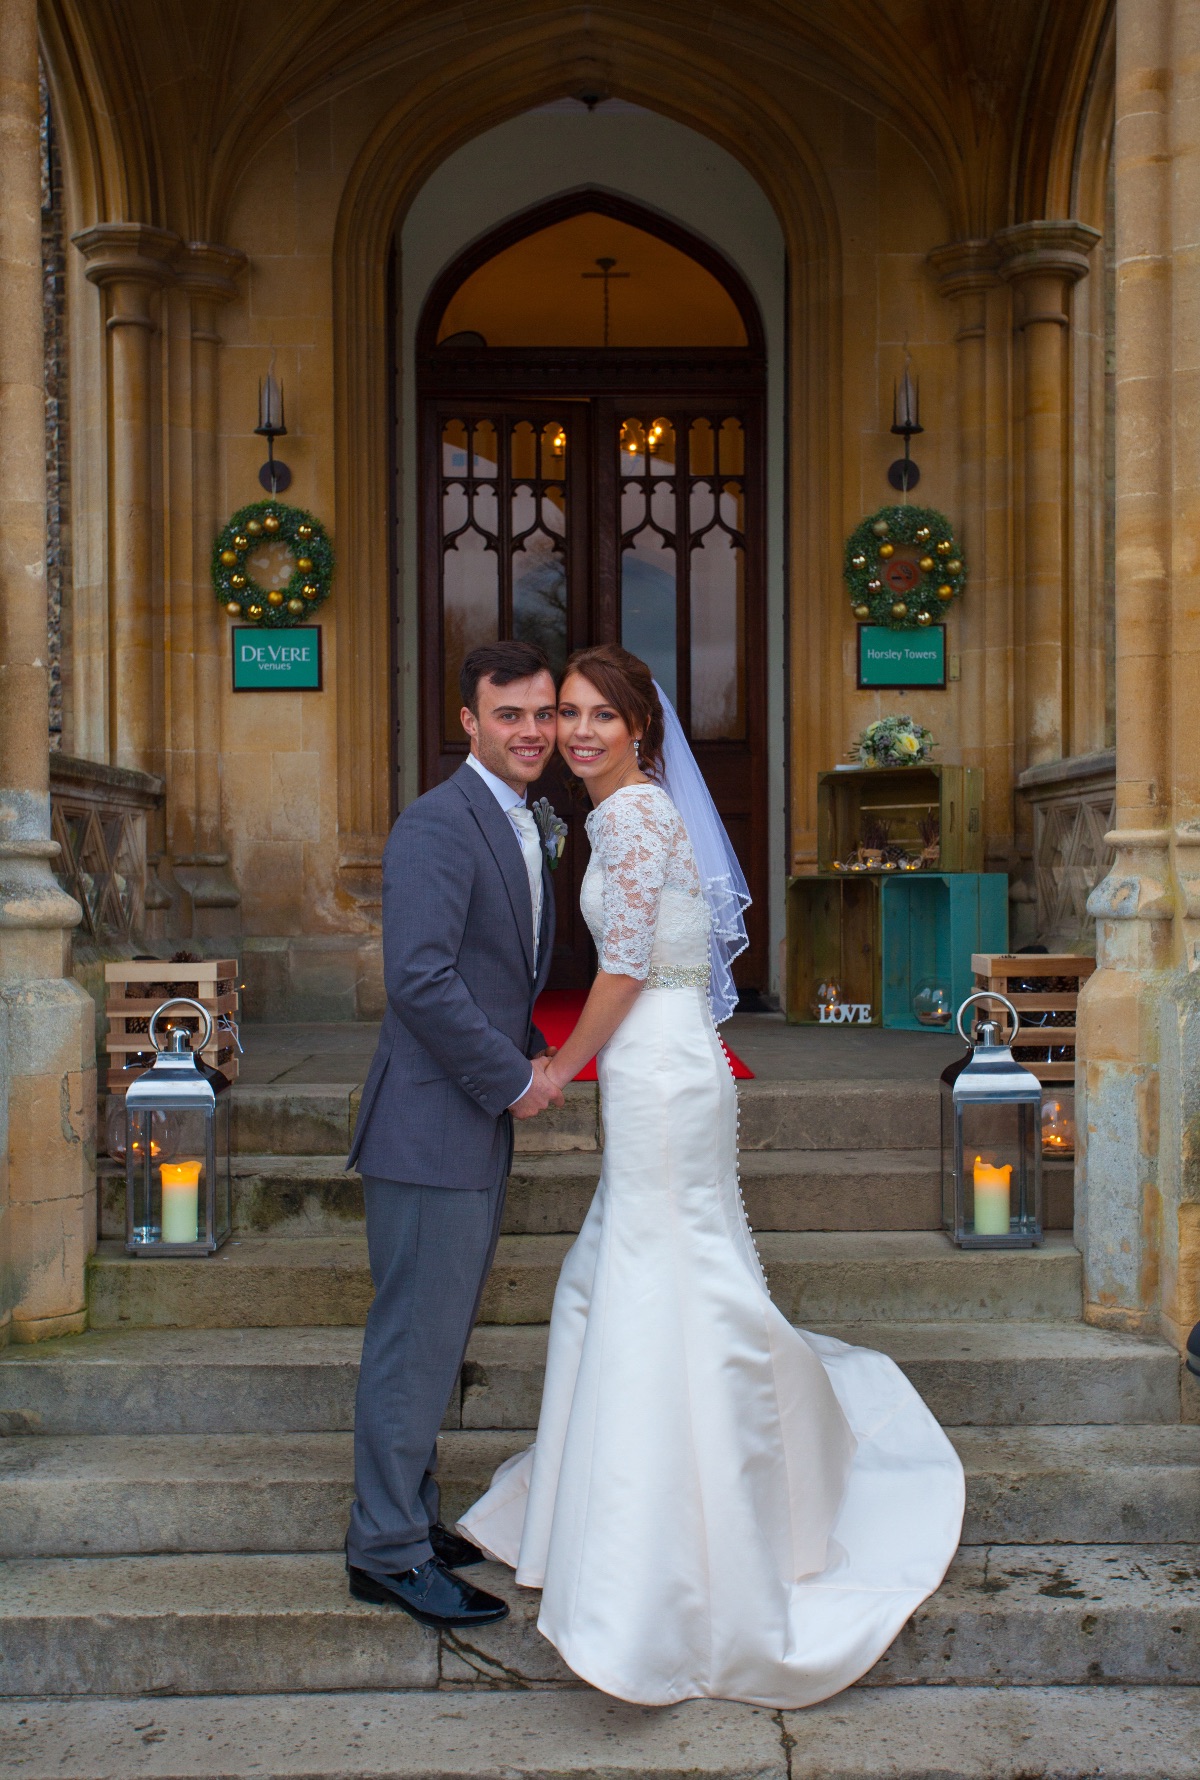 Stephanie and Tom on the steps of Horsley Towers